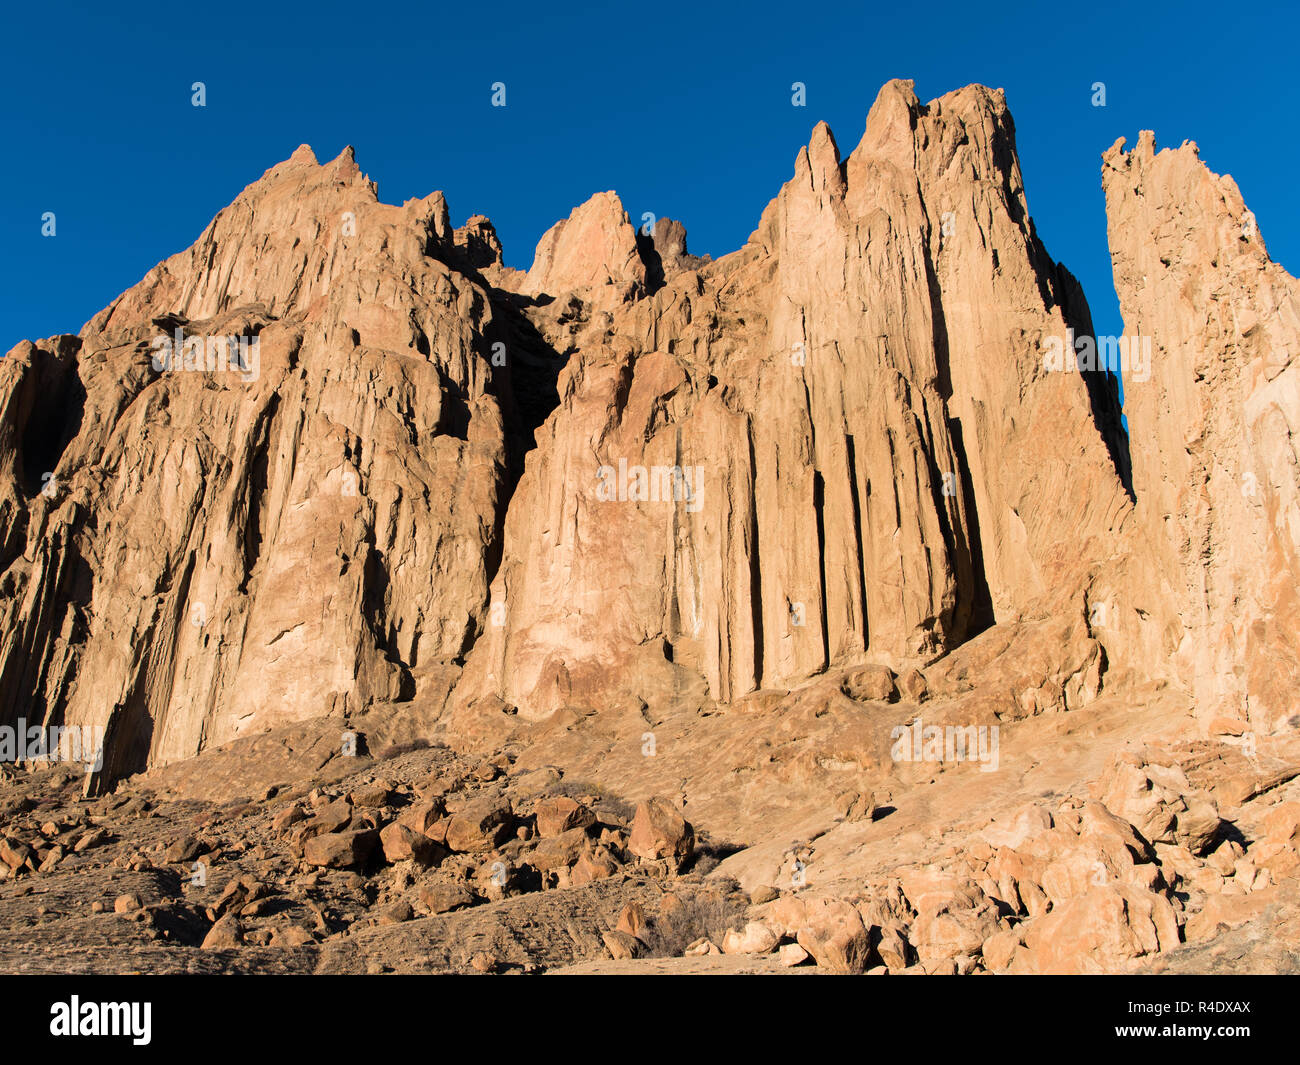 The high cliffs and crags of the Shiprock rock formation in New Mexico Stock Photo